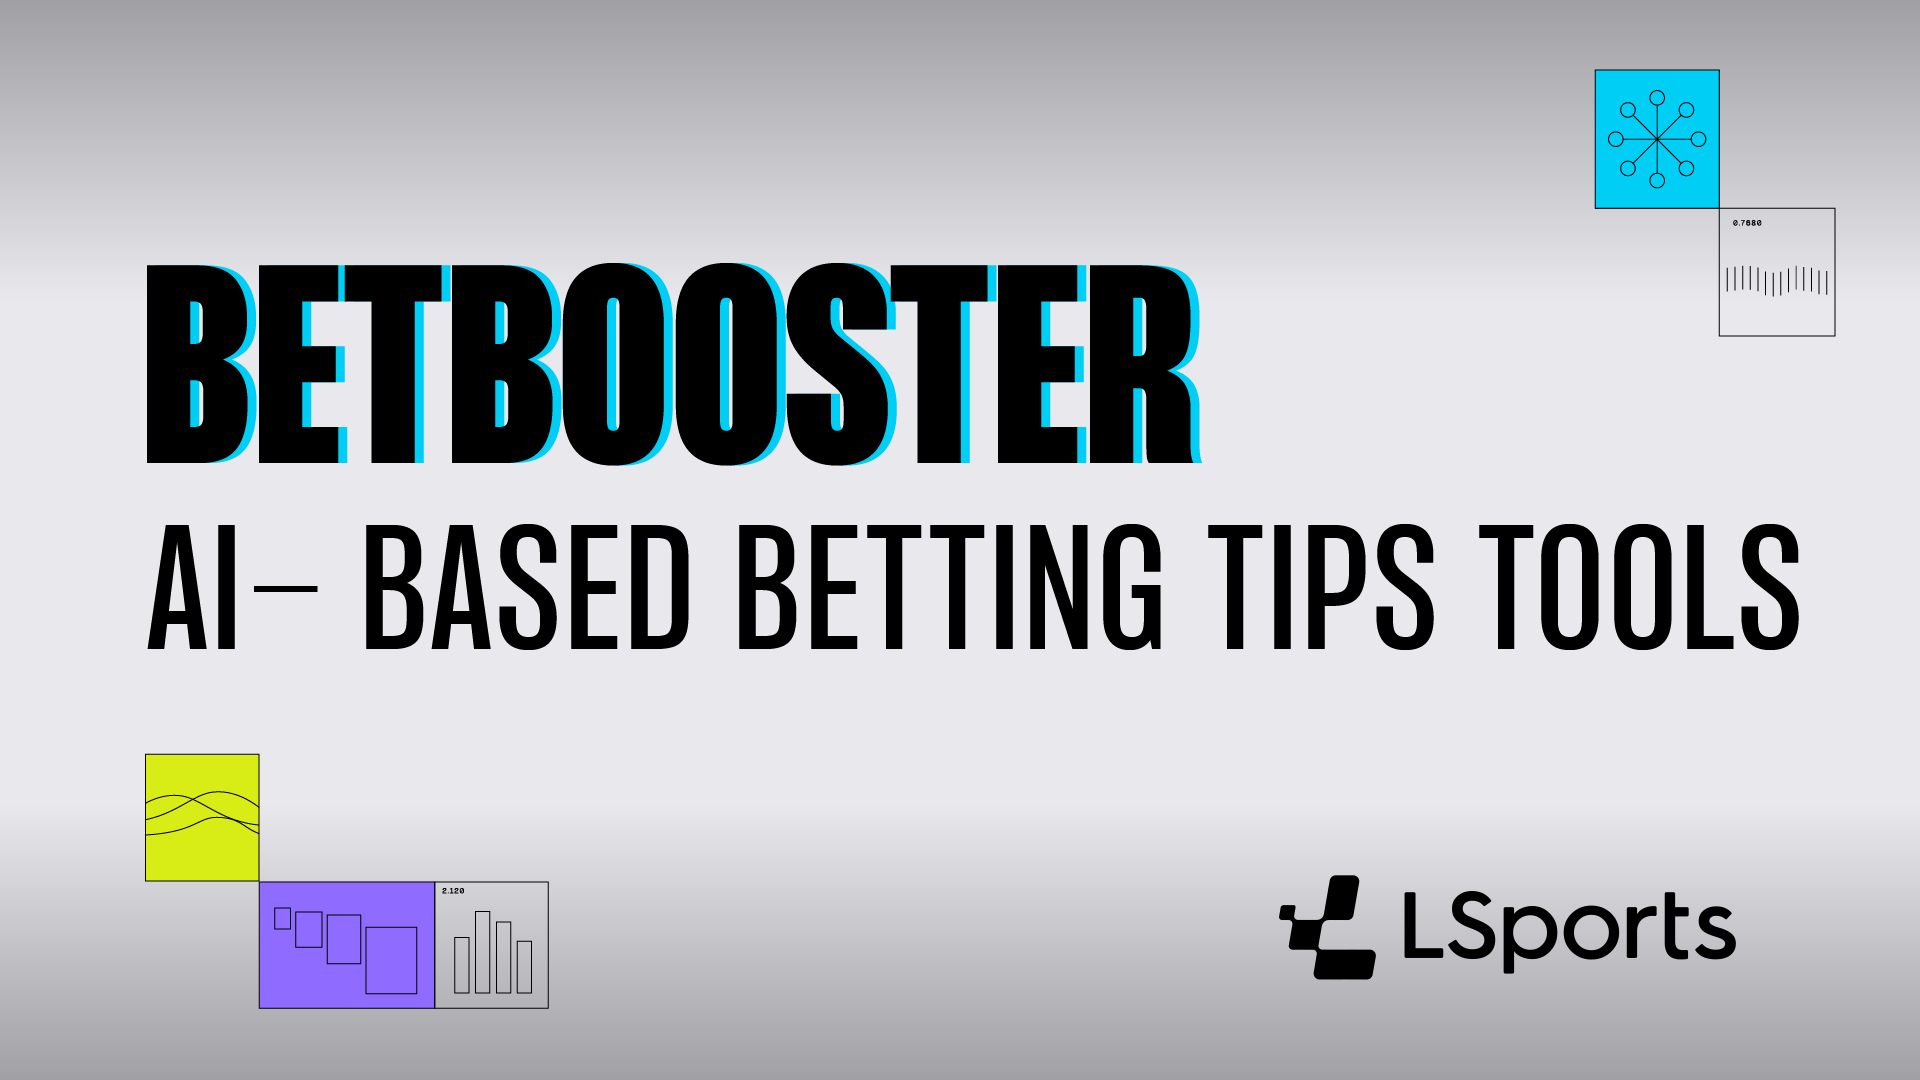 The Betbooster